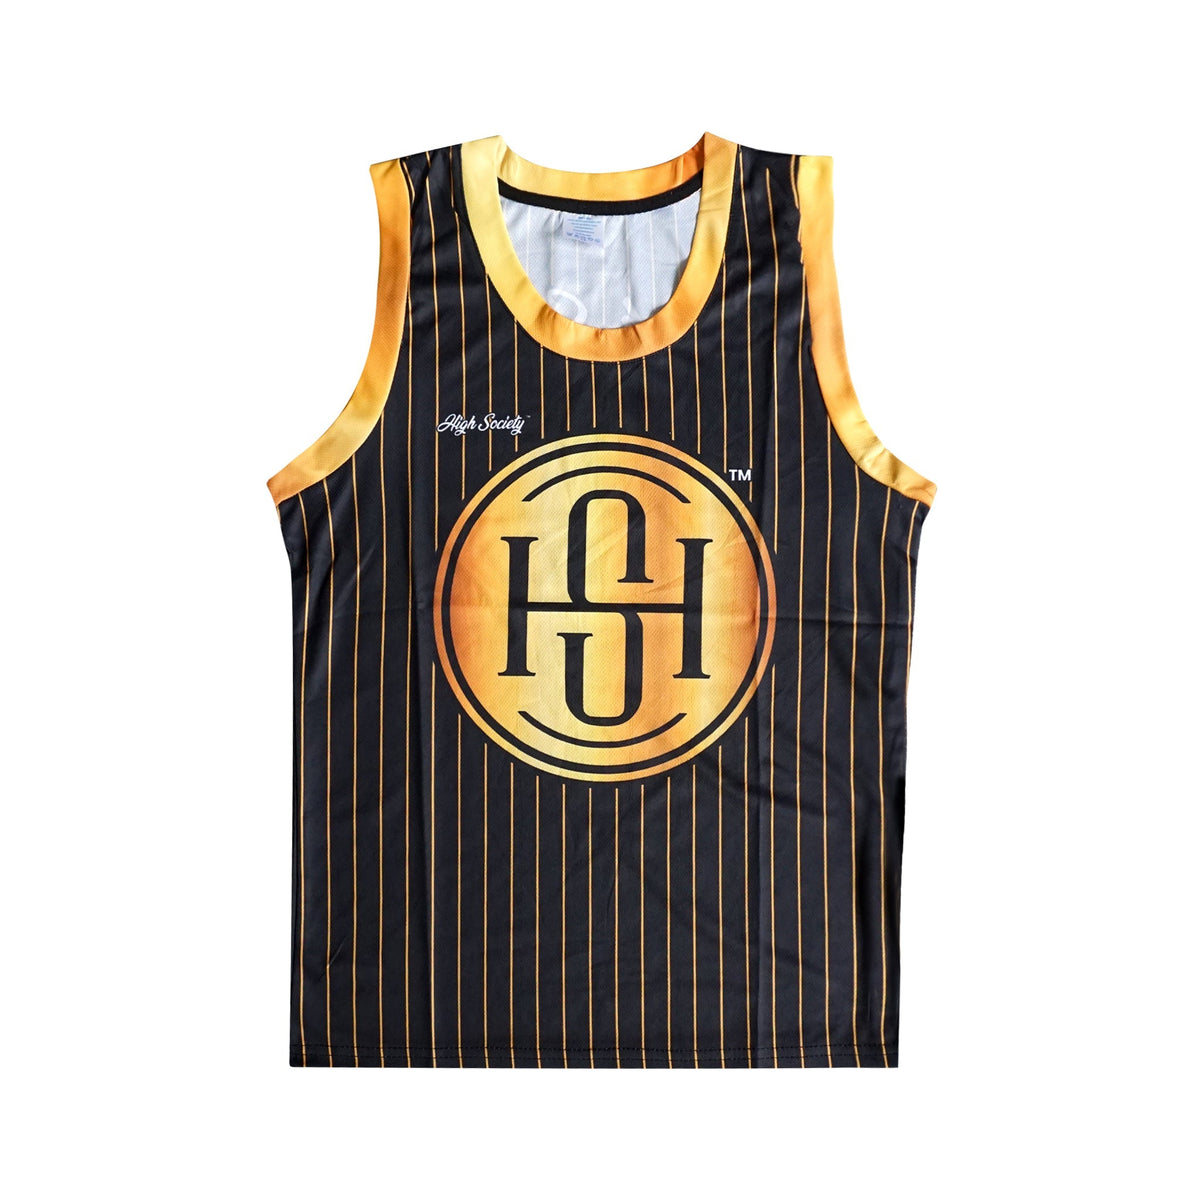 High Society | Limited Edition Team Basket Ball Jersey